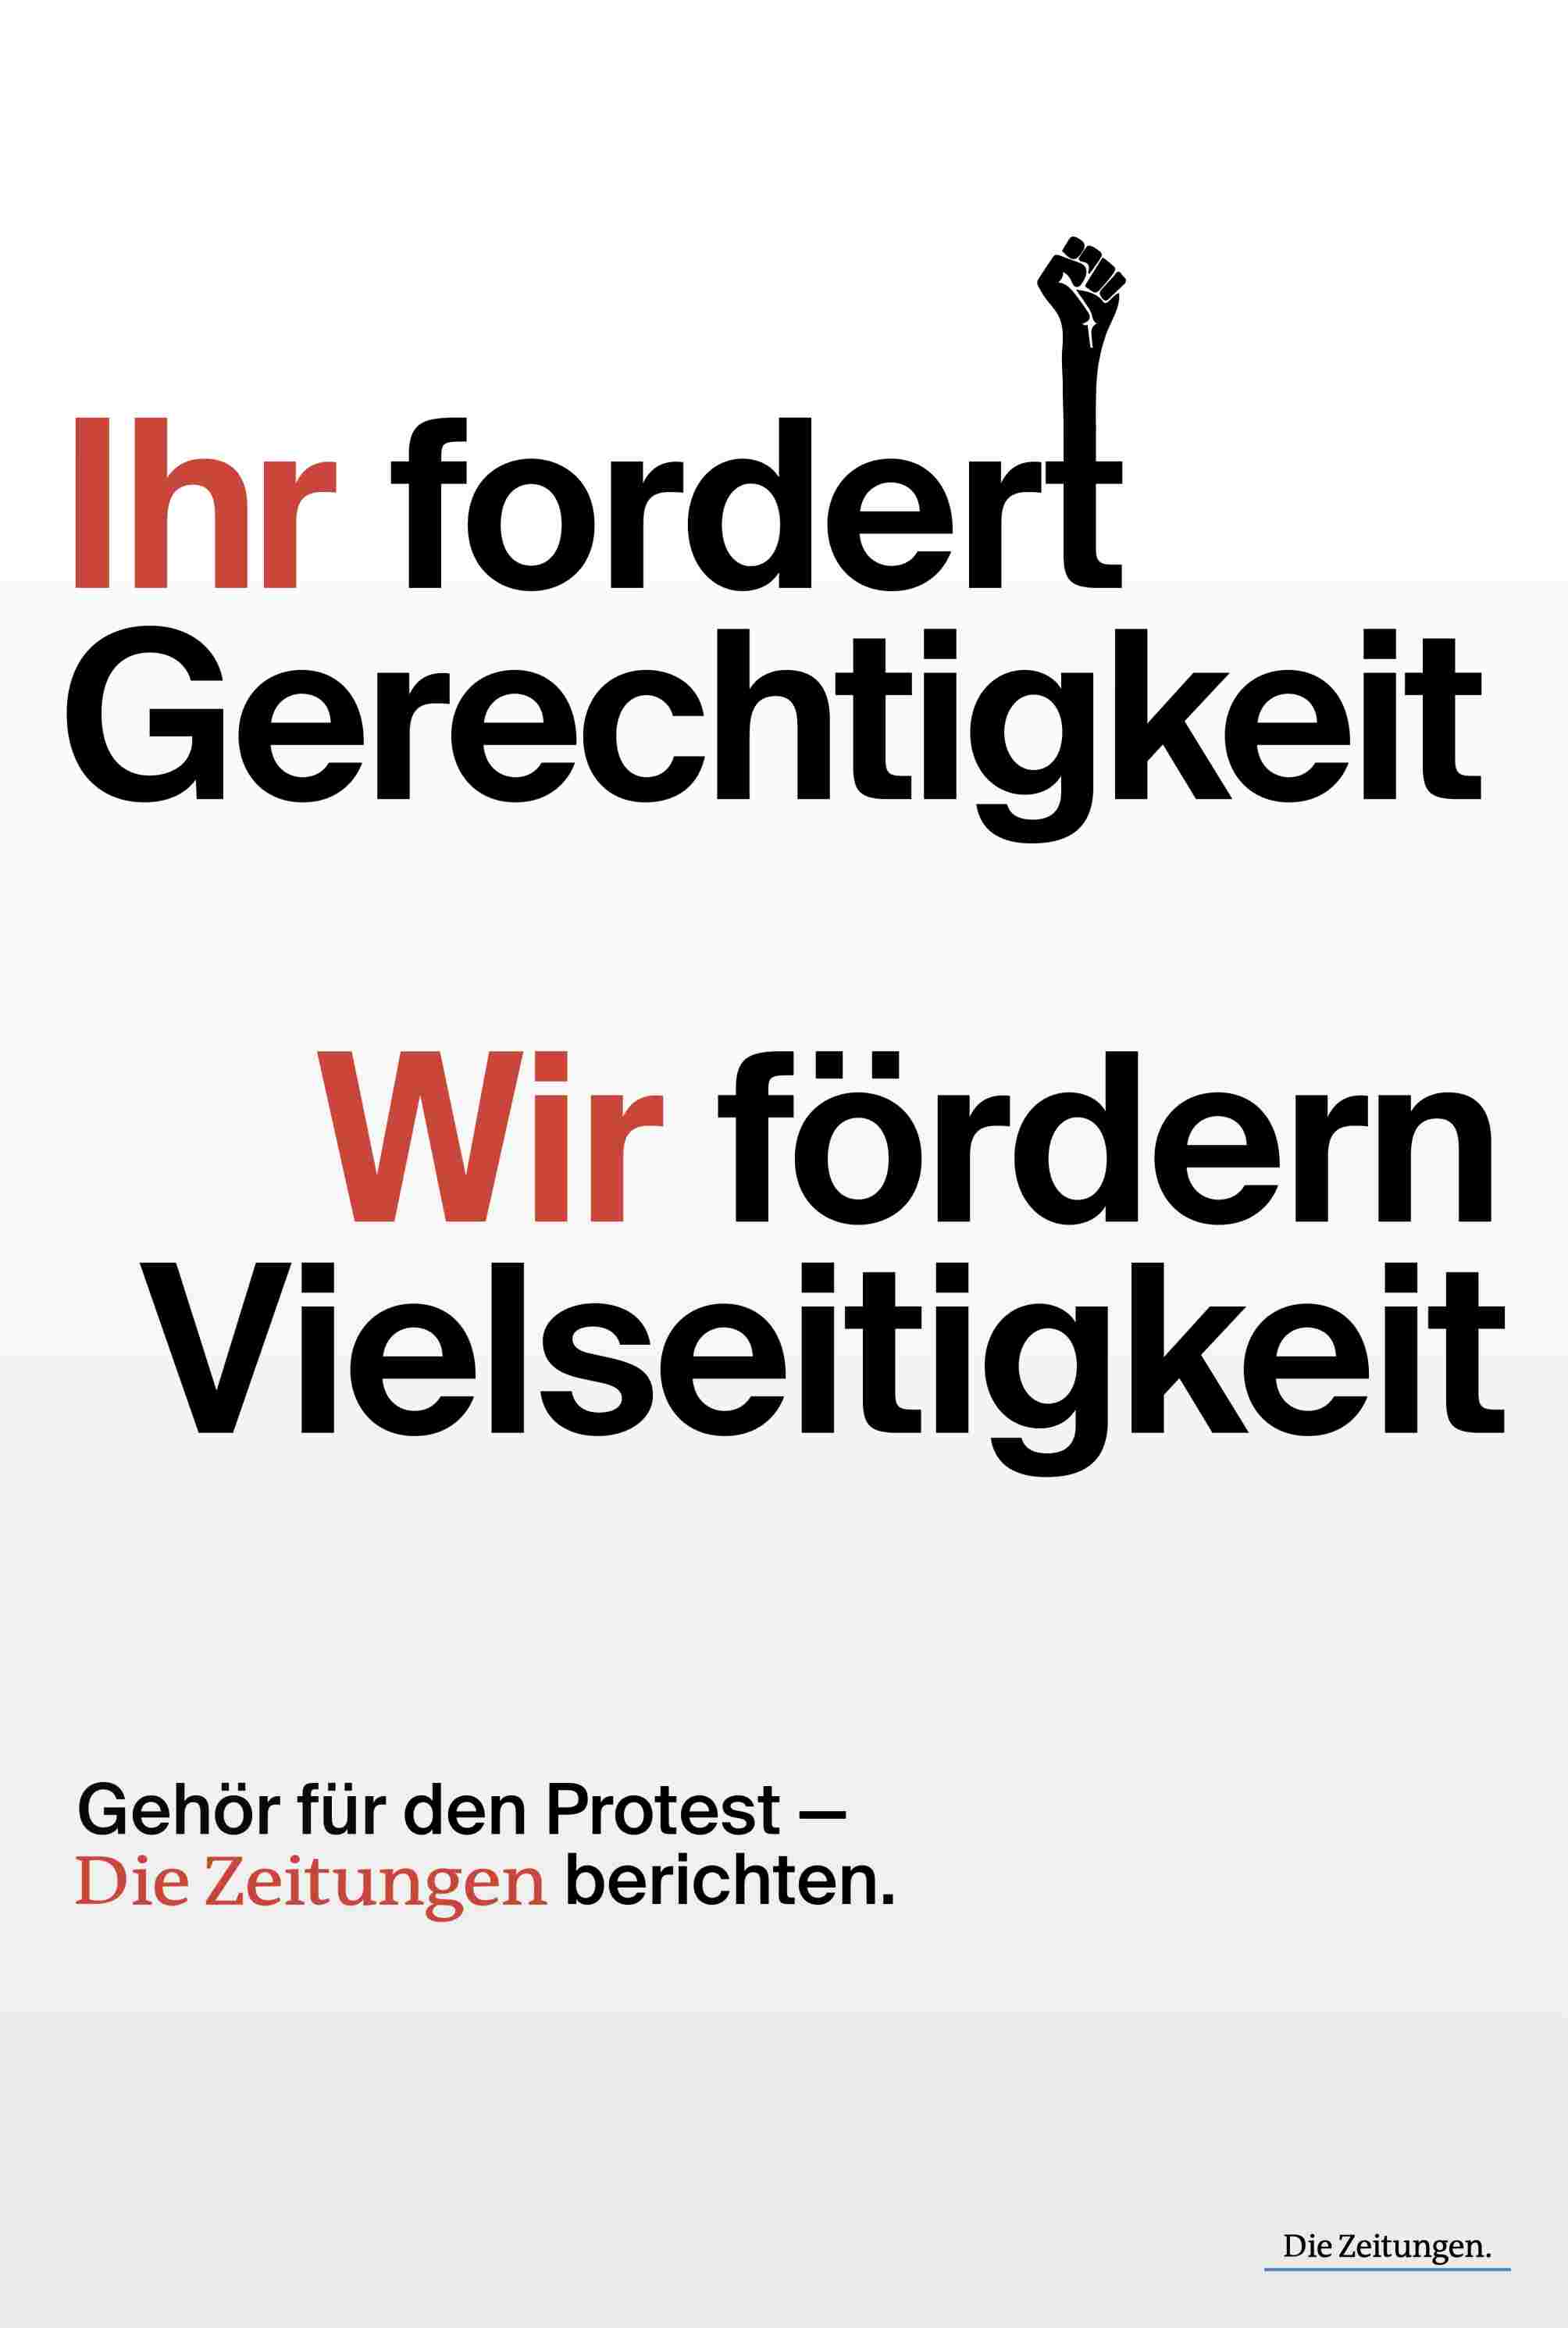 11_S-0070_628145_gallery_Janeck-Zwicky-Canthal-Protest3